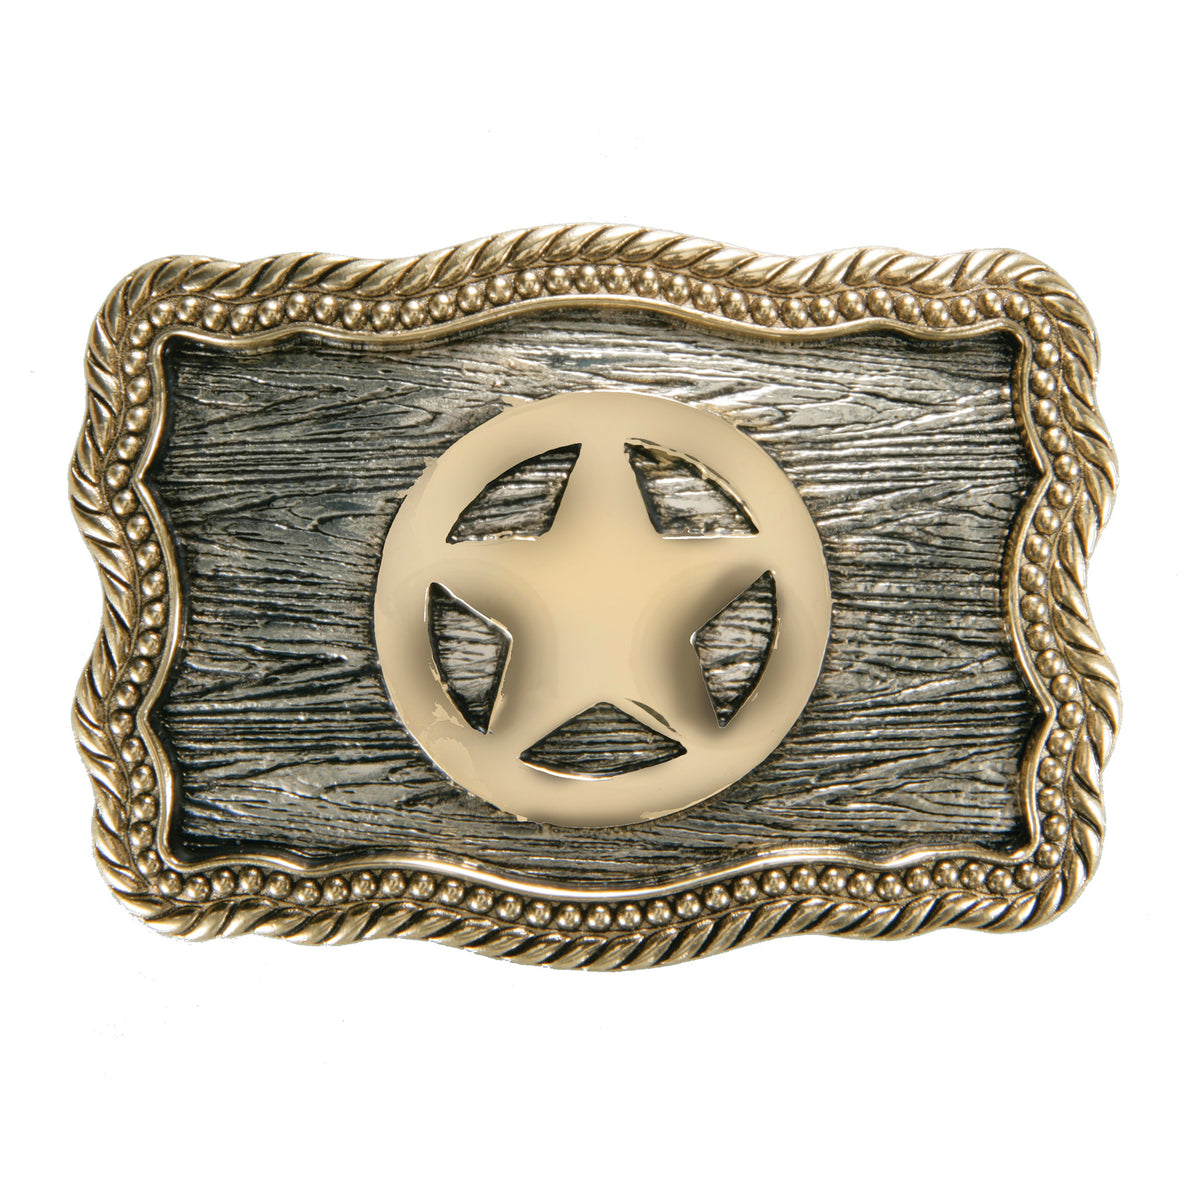 Texas Sheriff’s Star Iconic Classic Buckle